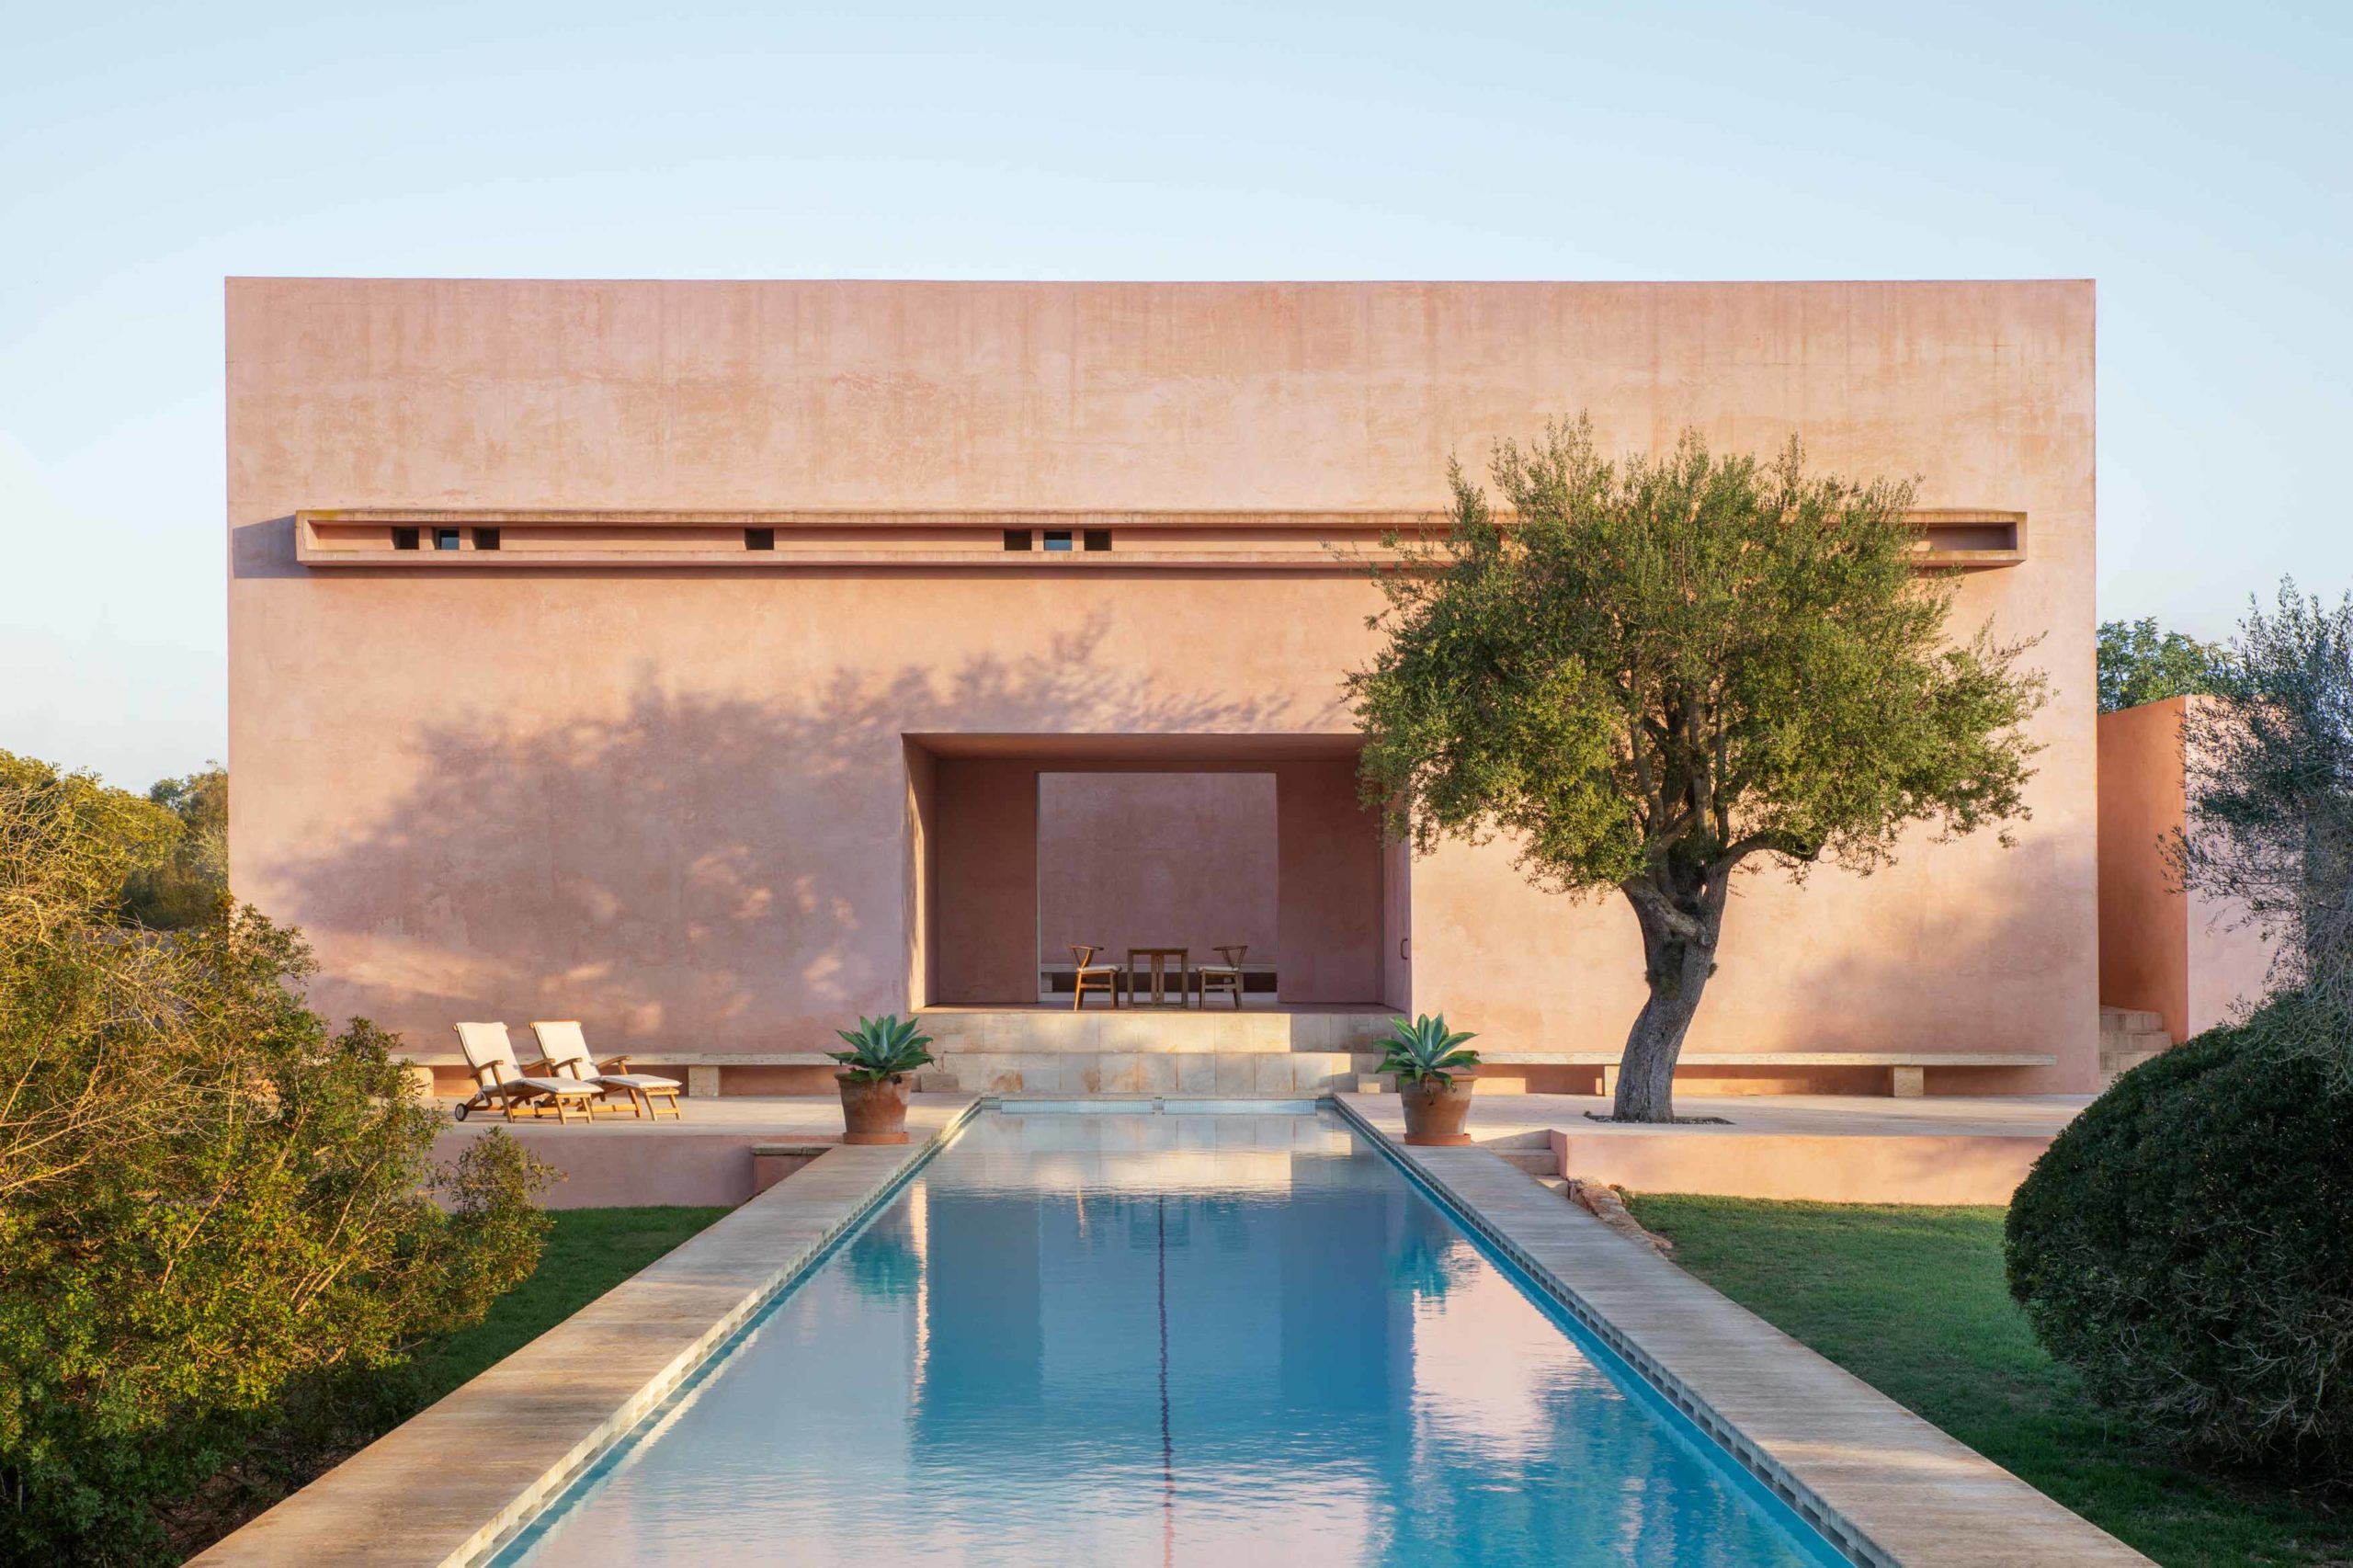 The striking Neuendorf House designed by John Pawson and Claudio Silvestrin is one of the houses up for auction